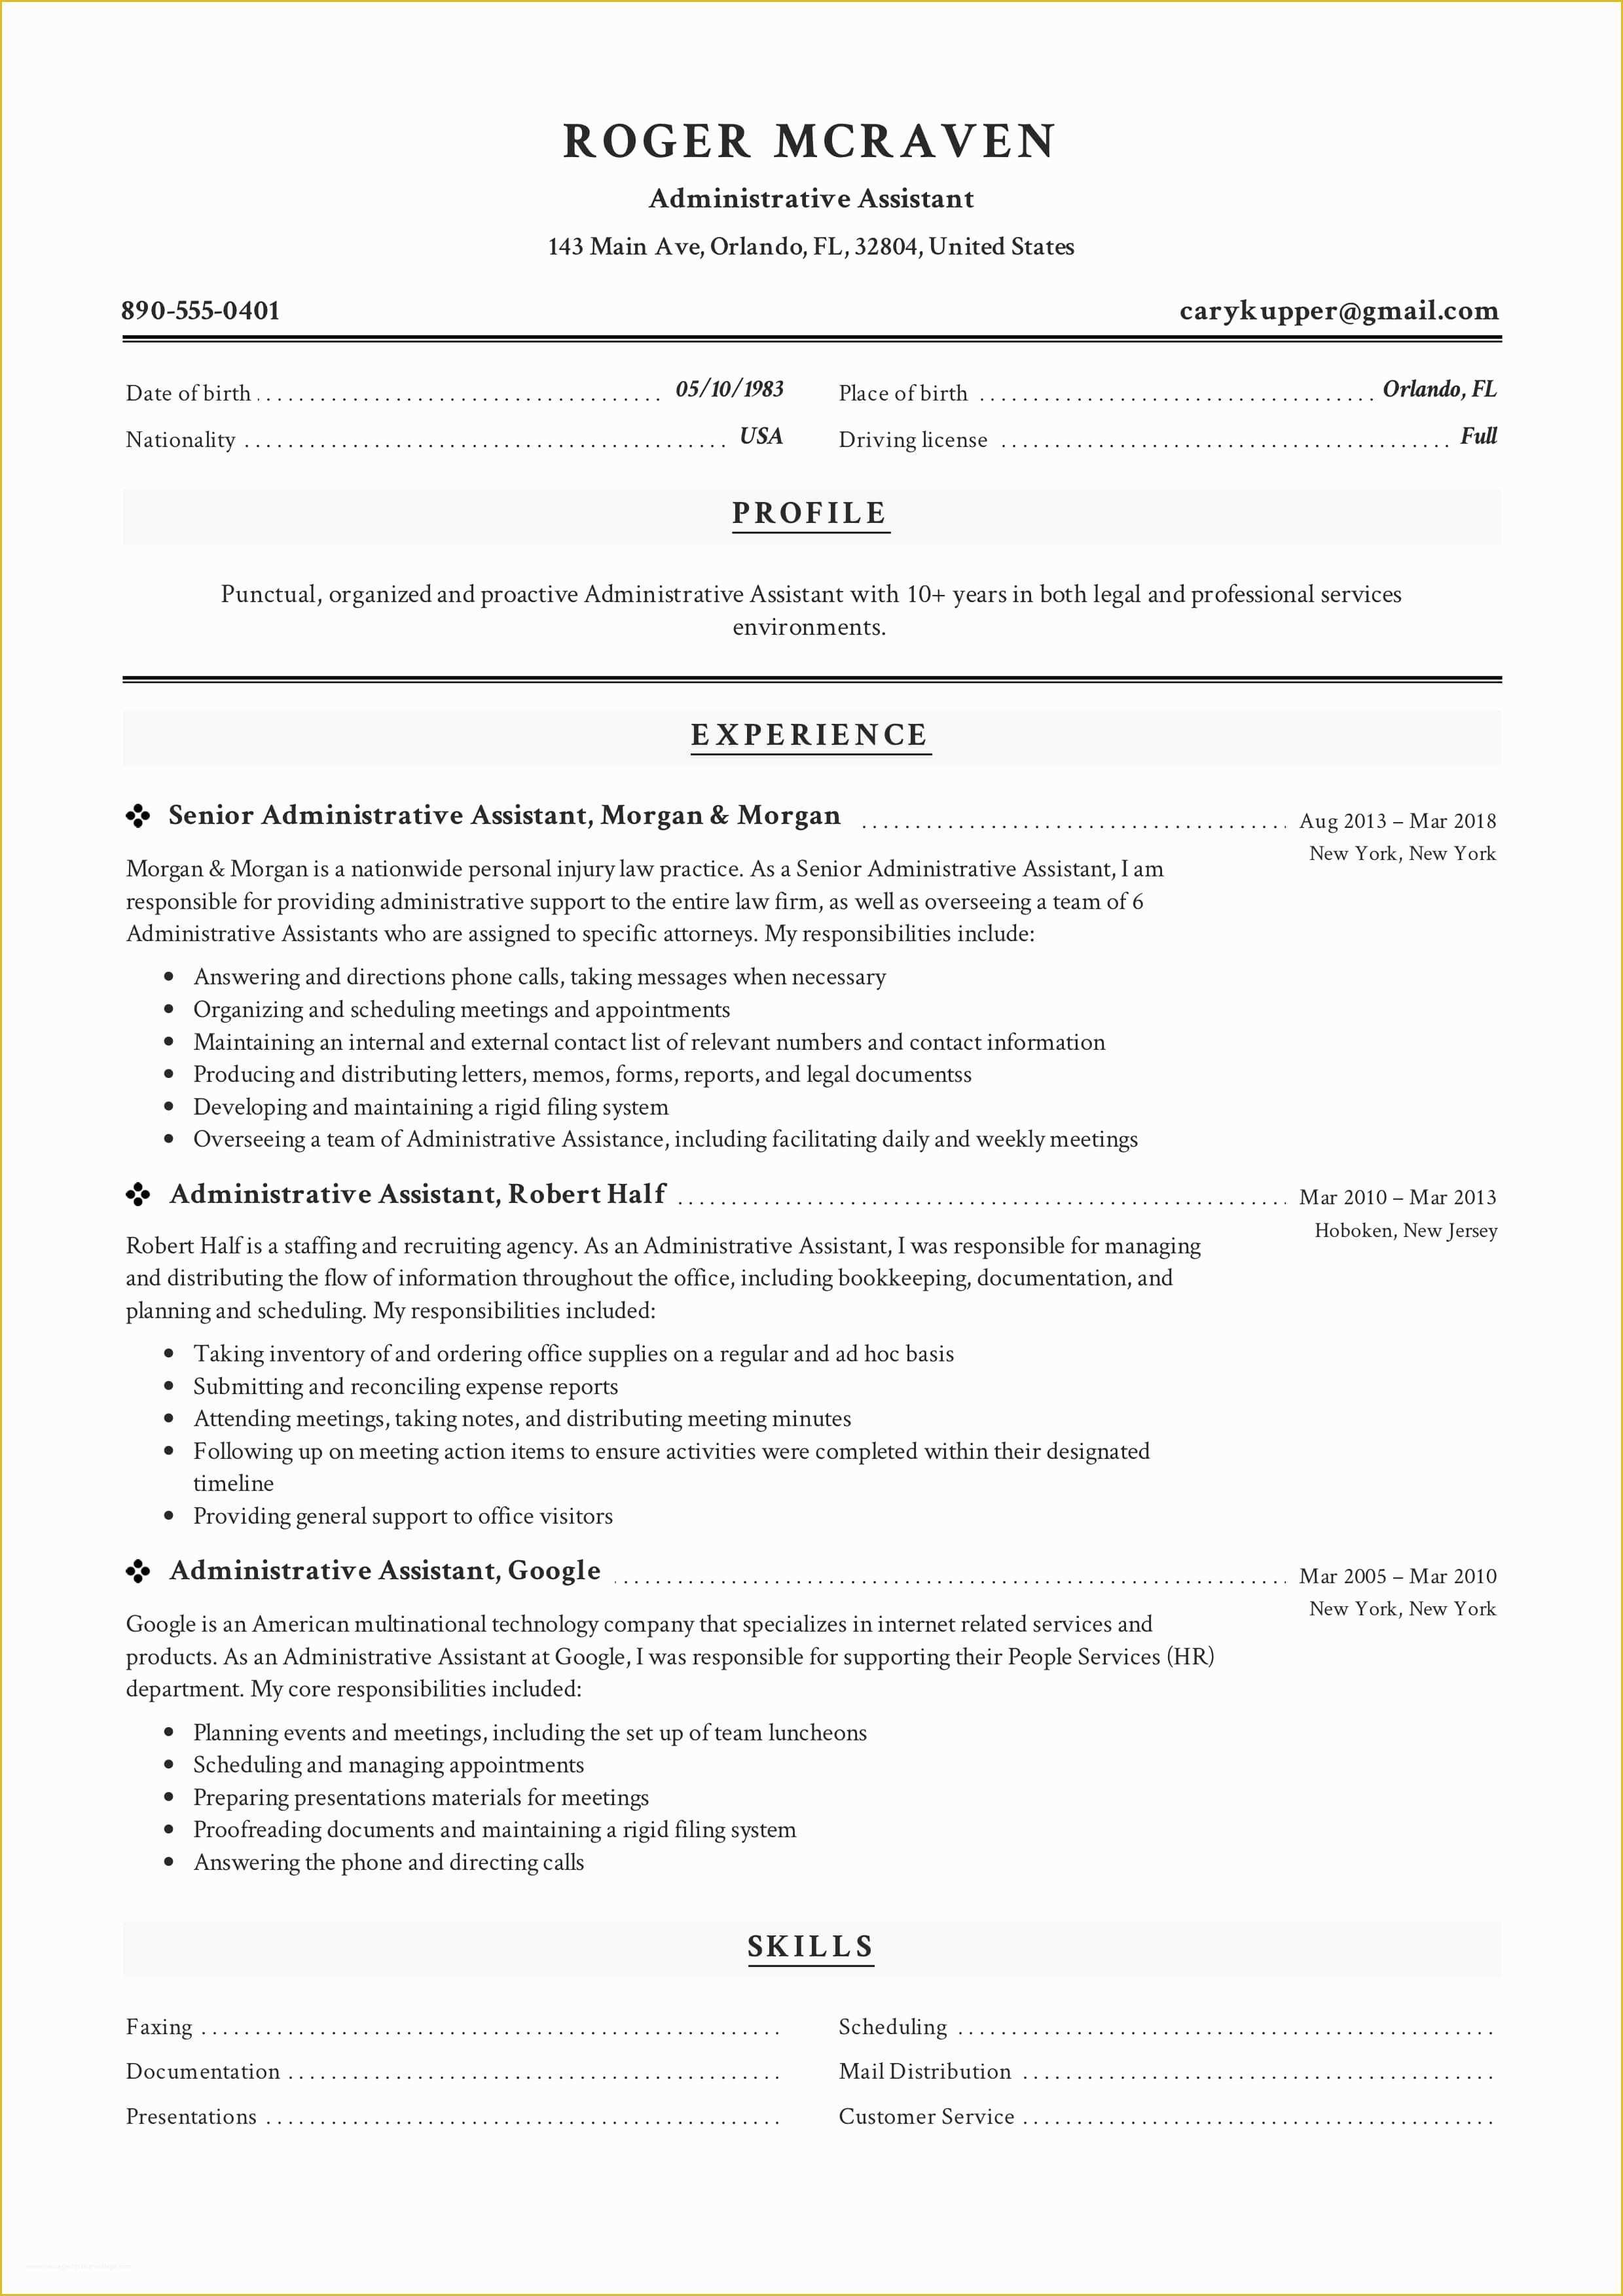 Free Administrative assistant Resume Templates Of Full Guide Administrative assistant Resume [ 12 Samples